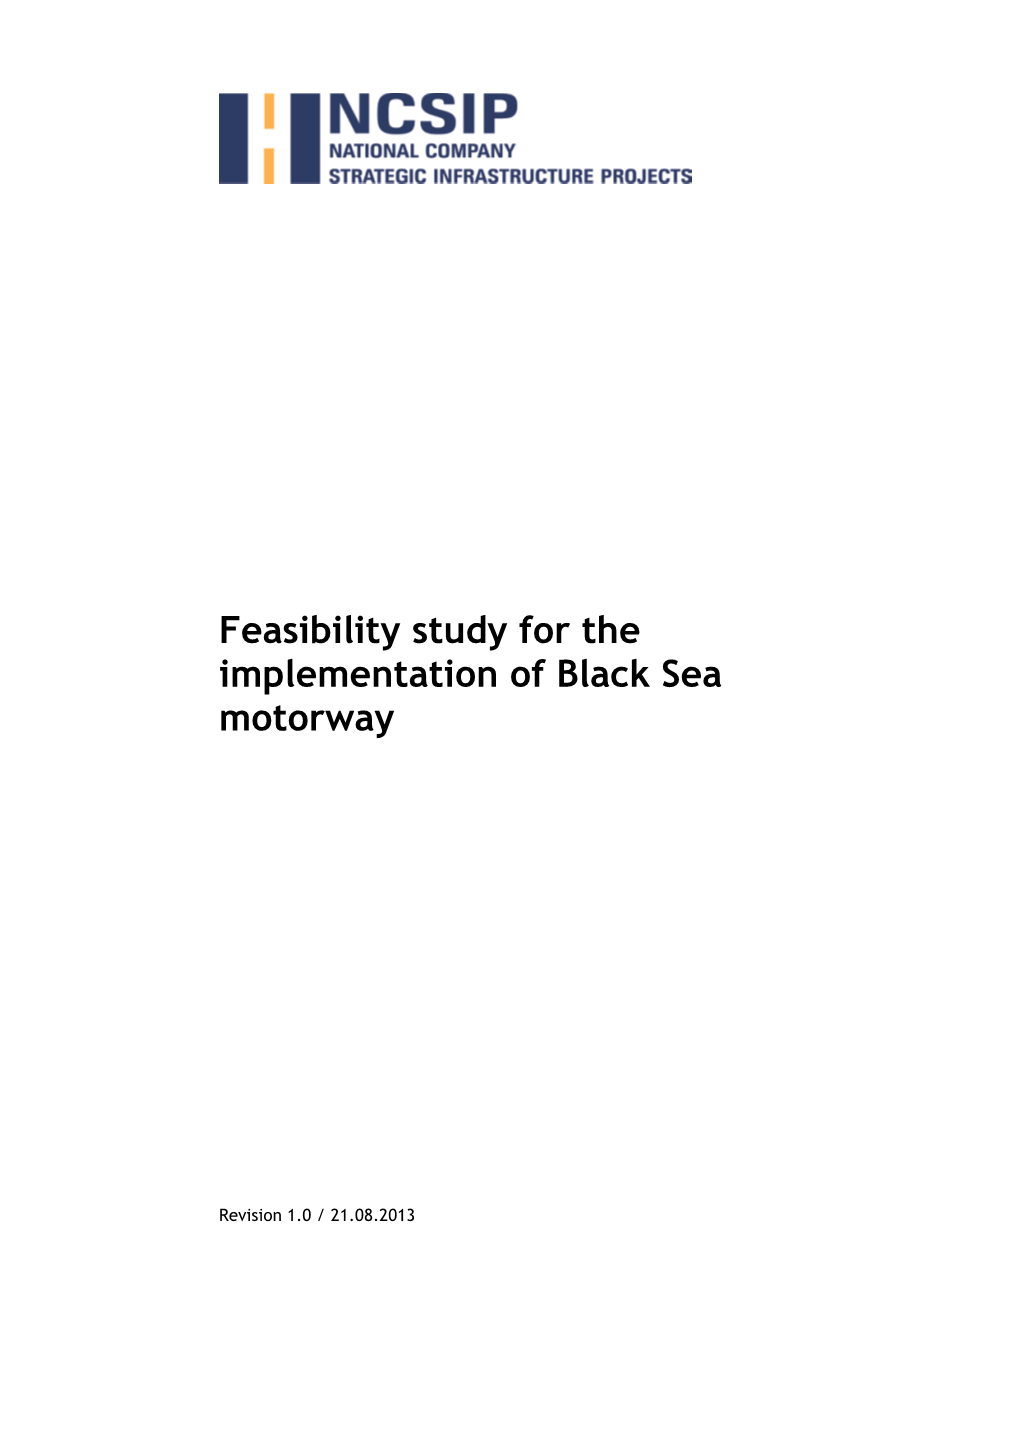 Feasibility Study for the Implementation of the Black Sea Motorway, 2013